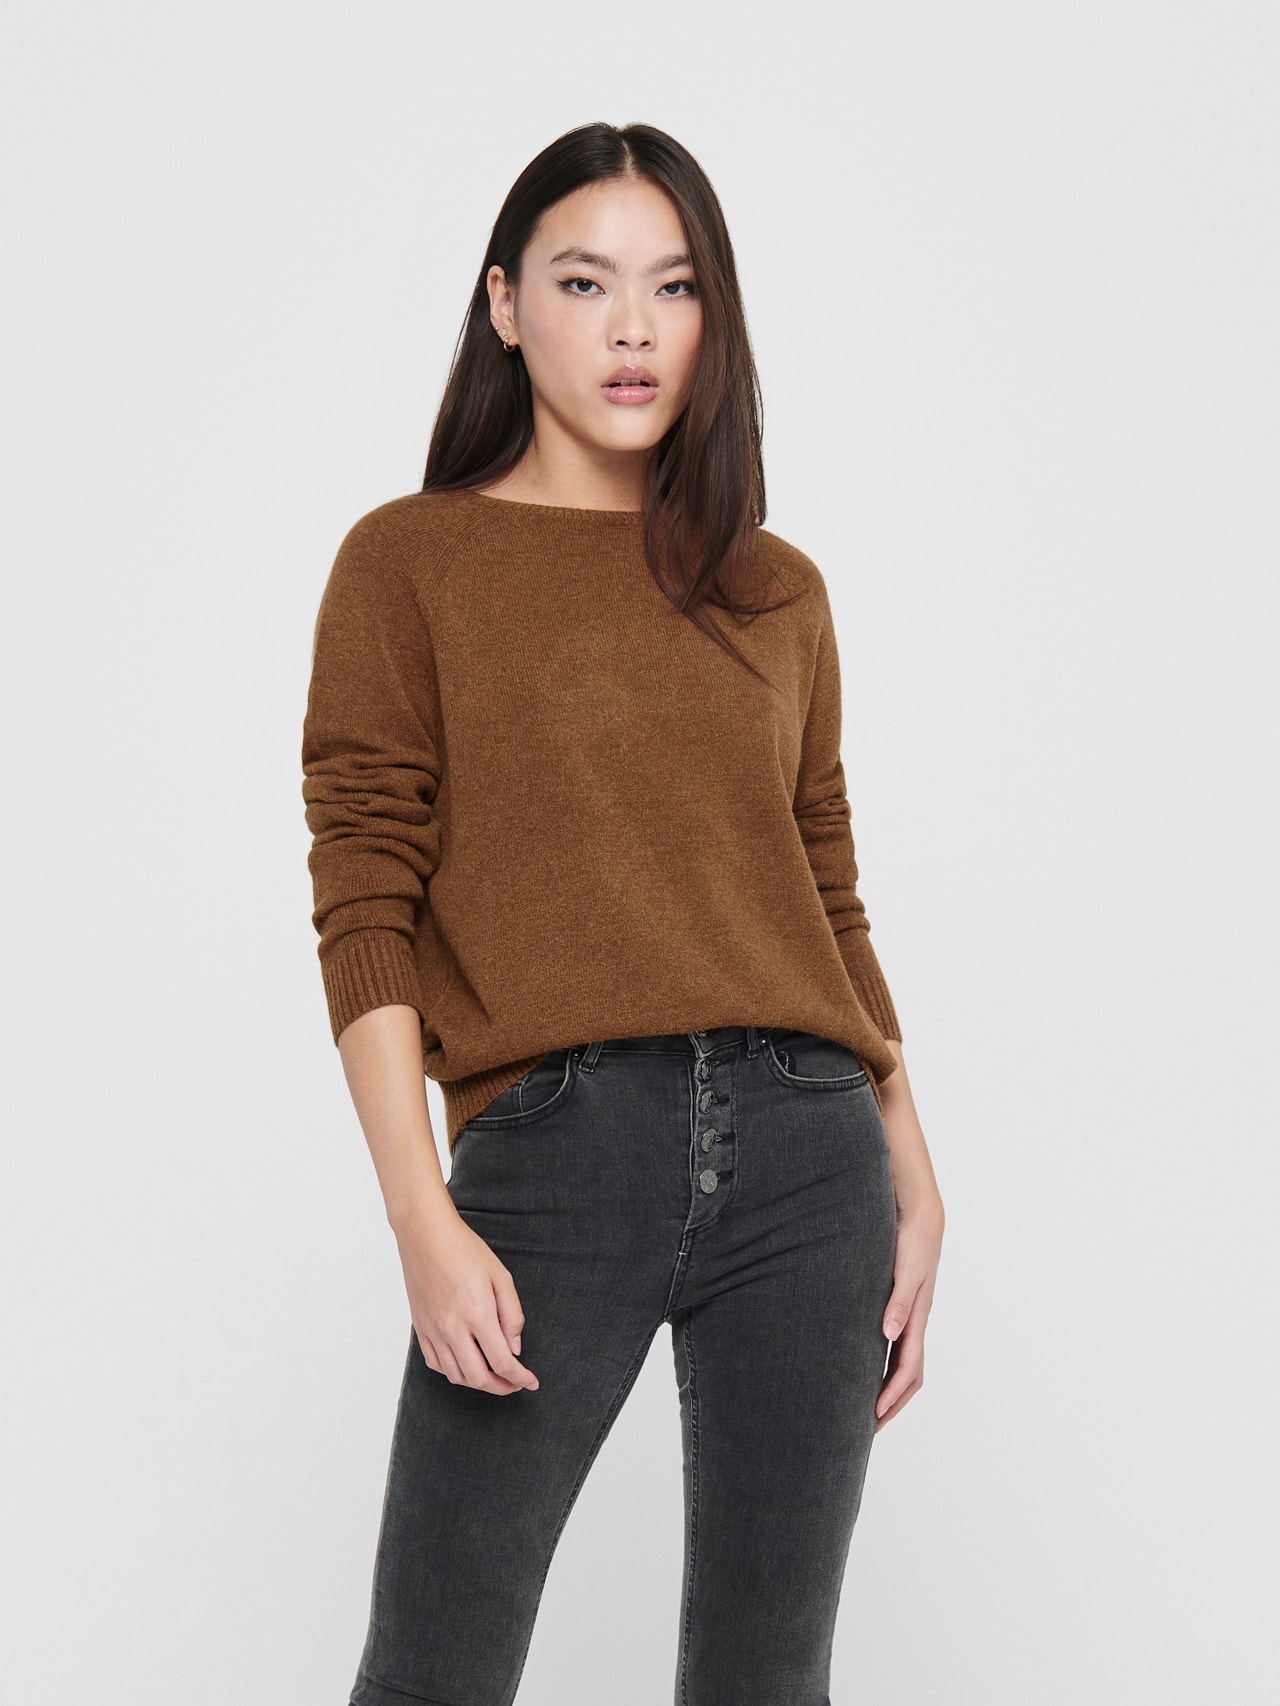 ONLY Solid colored Knitted Pullover -Tortoise Shell - 15170427